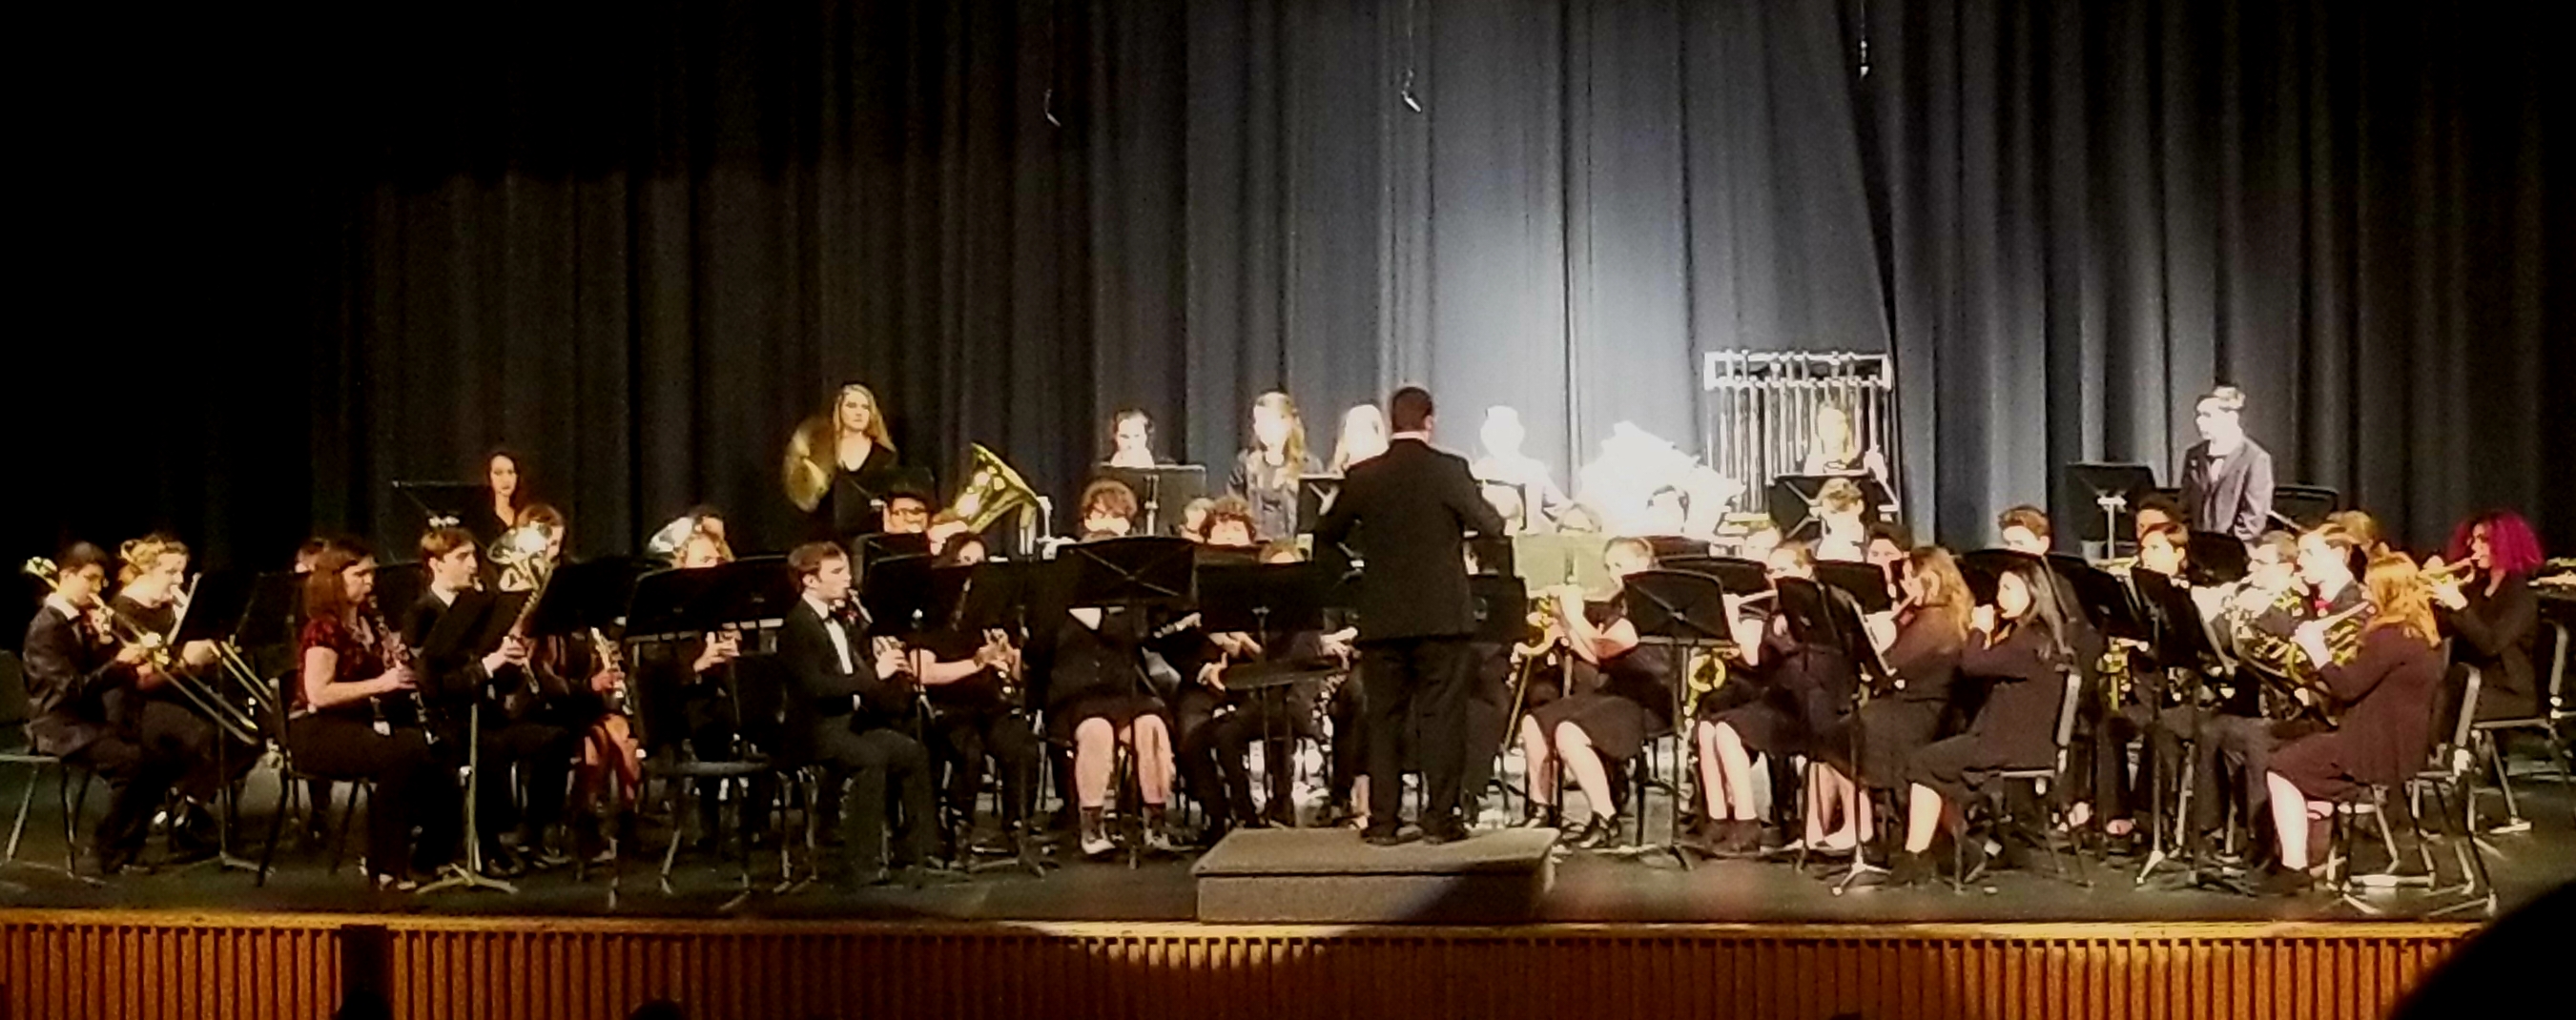 Central High School Band Concert, May 2019